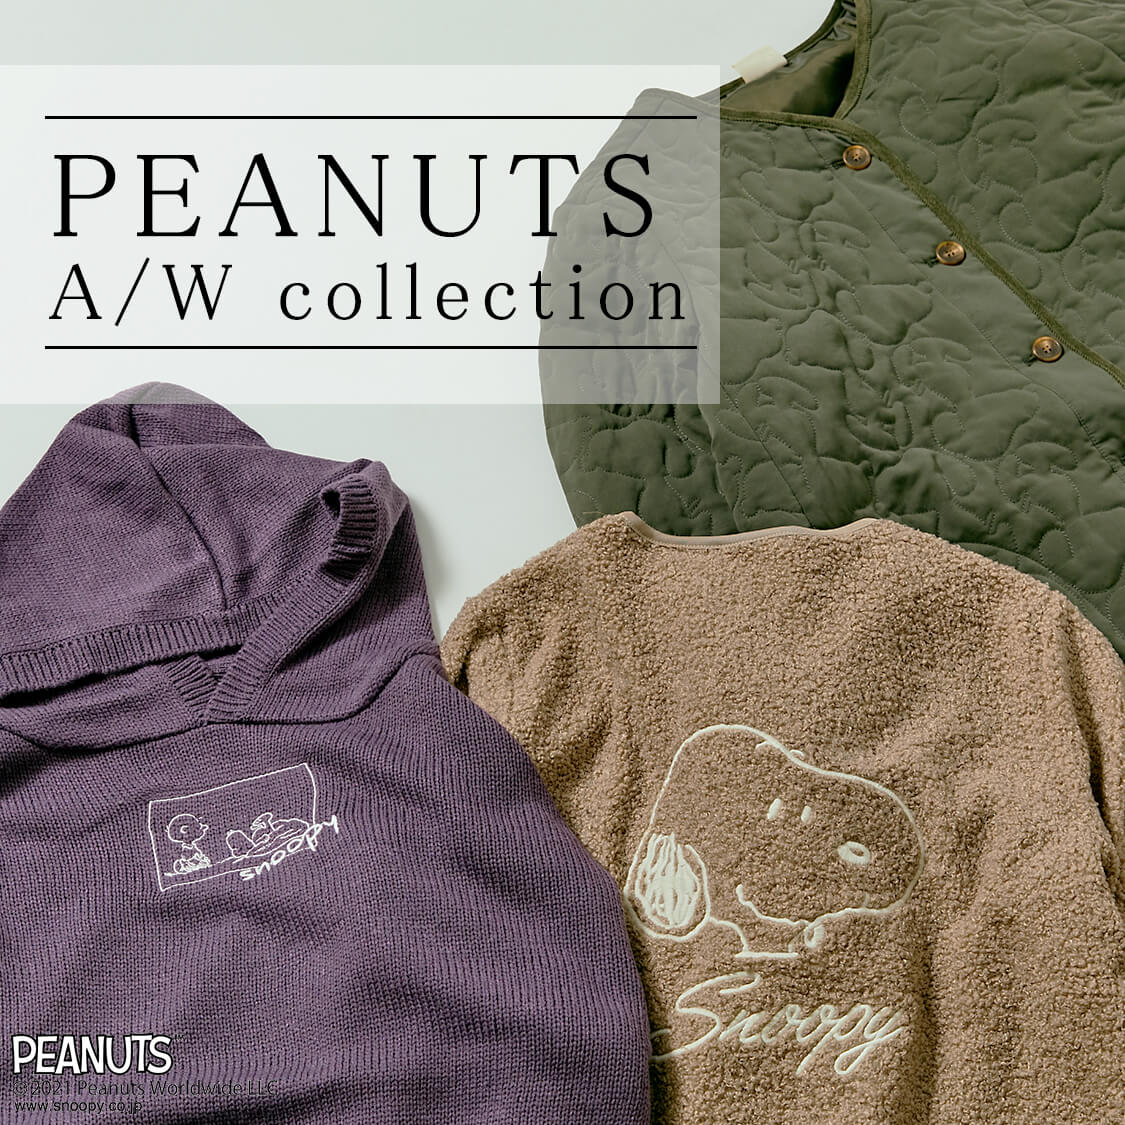 peanutsAWcollection